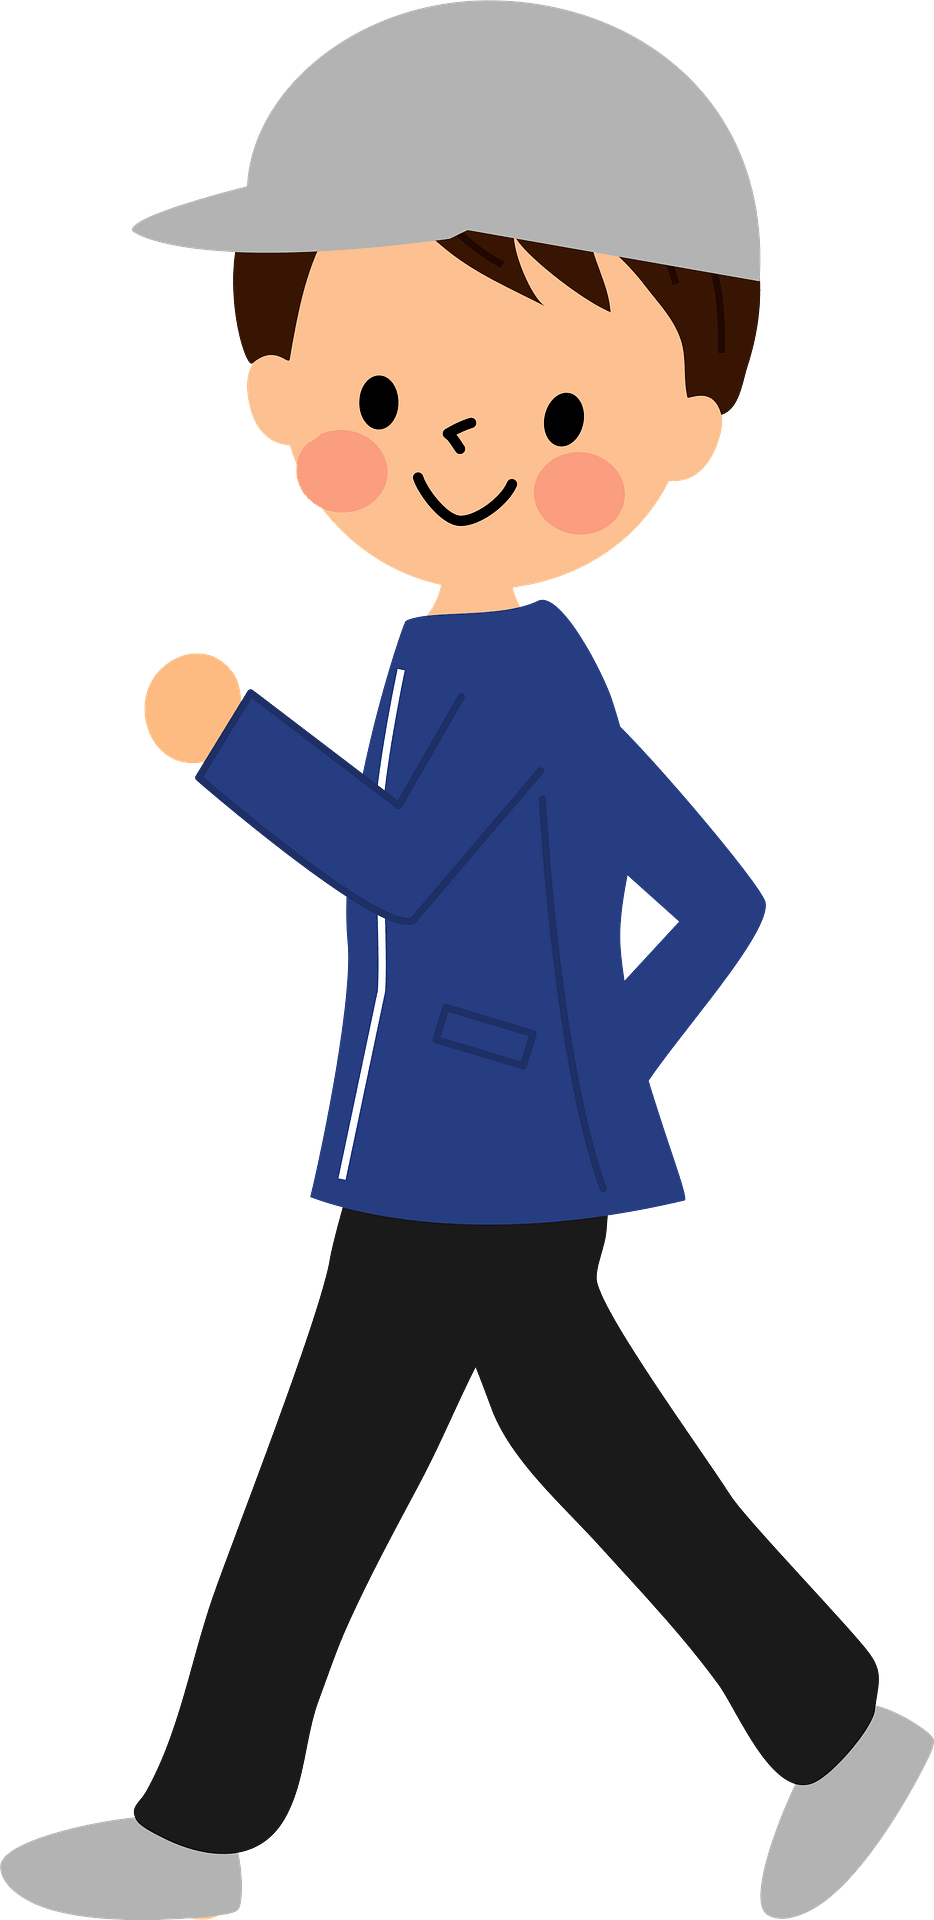 https://clipart-library.com/8300/2368/man-walking-exercise-clipart-xl.png